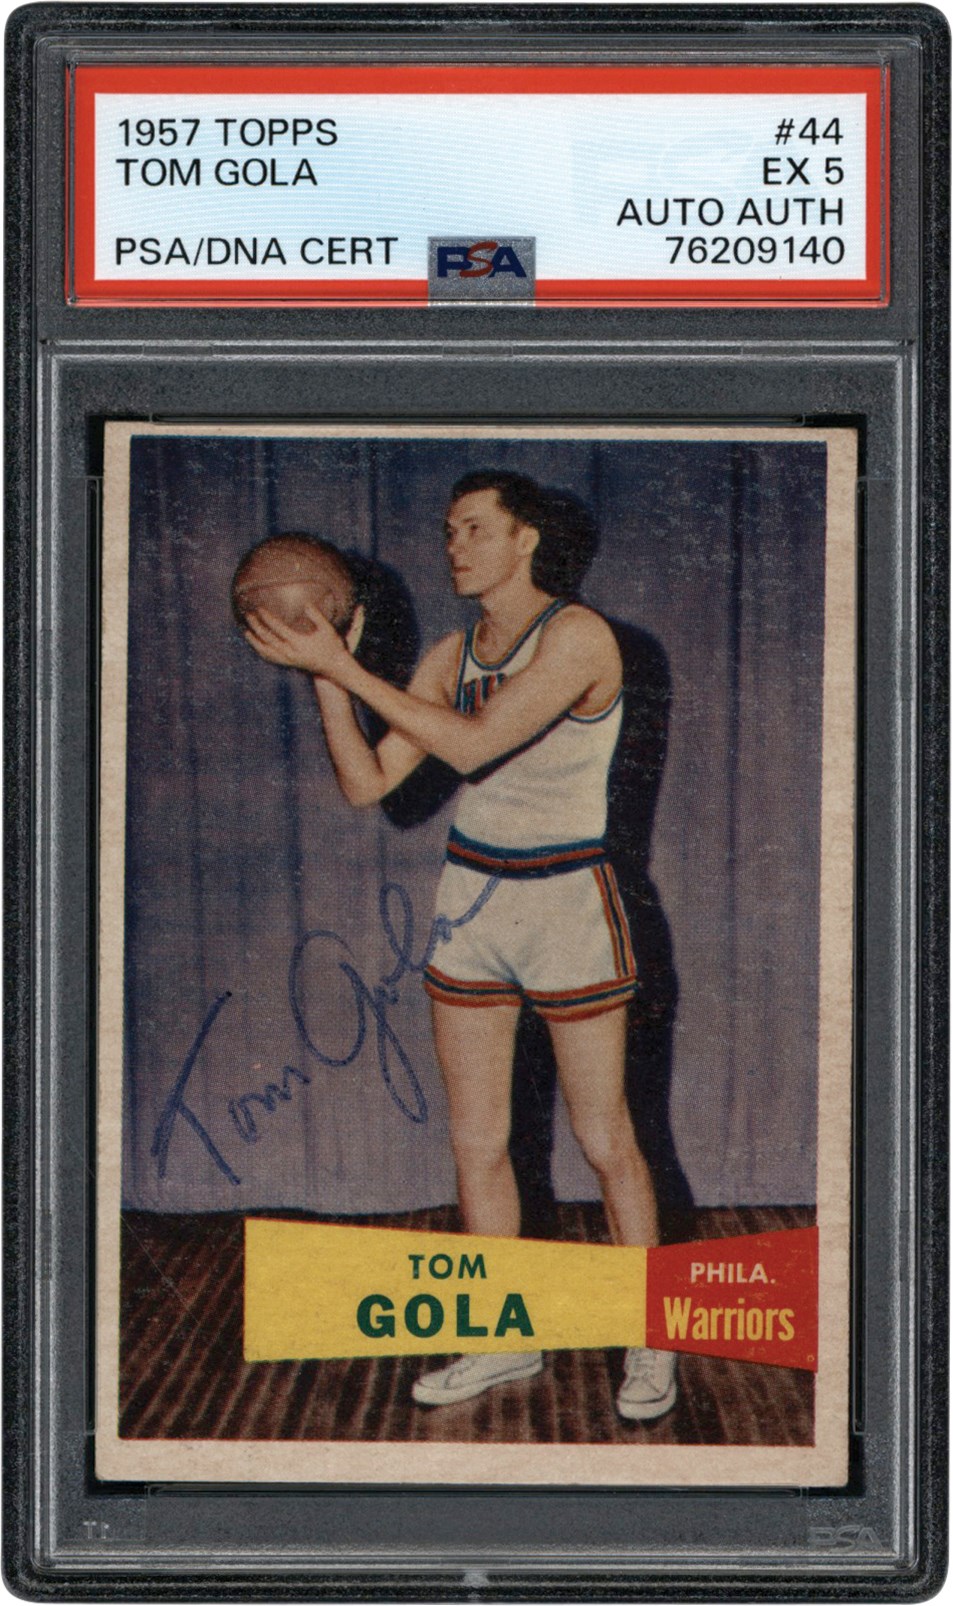 - 1957 Topps Basketball #44 Tom Gola Signed Rookie Card PSA EX 5 Auto Auth (Pop 1 One Higher)